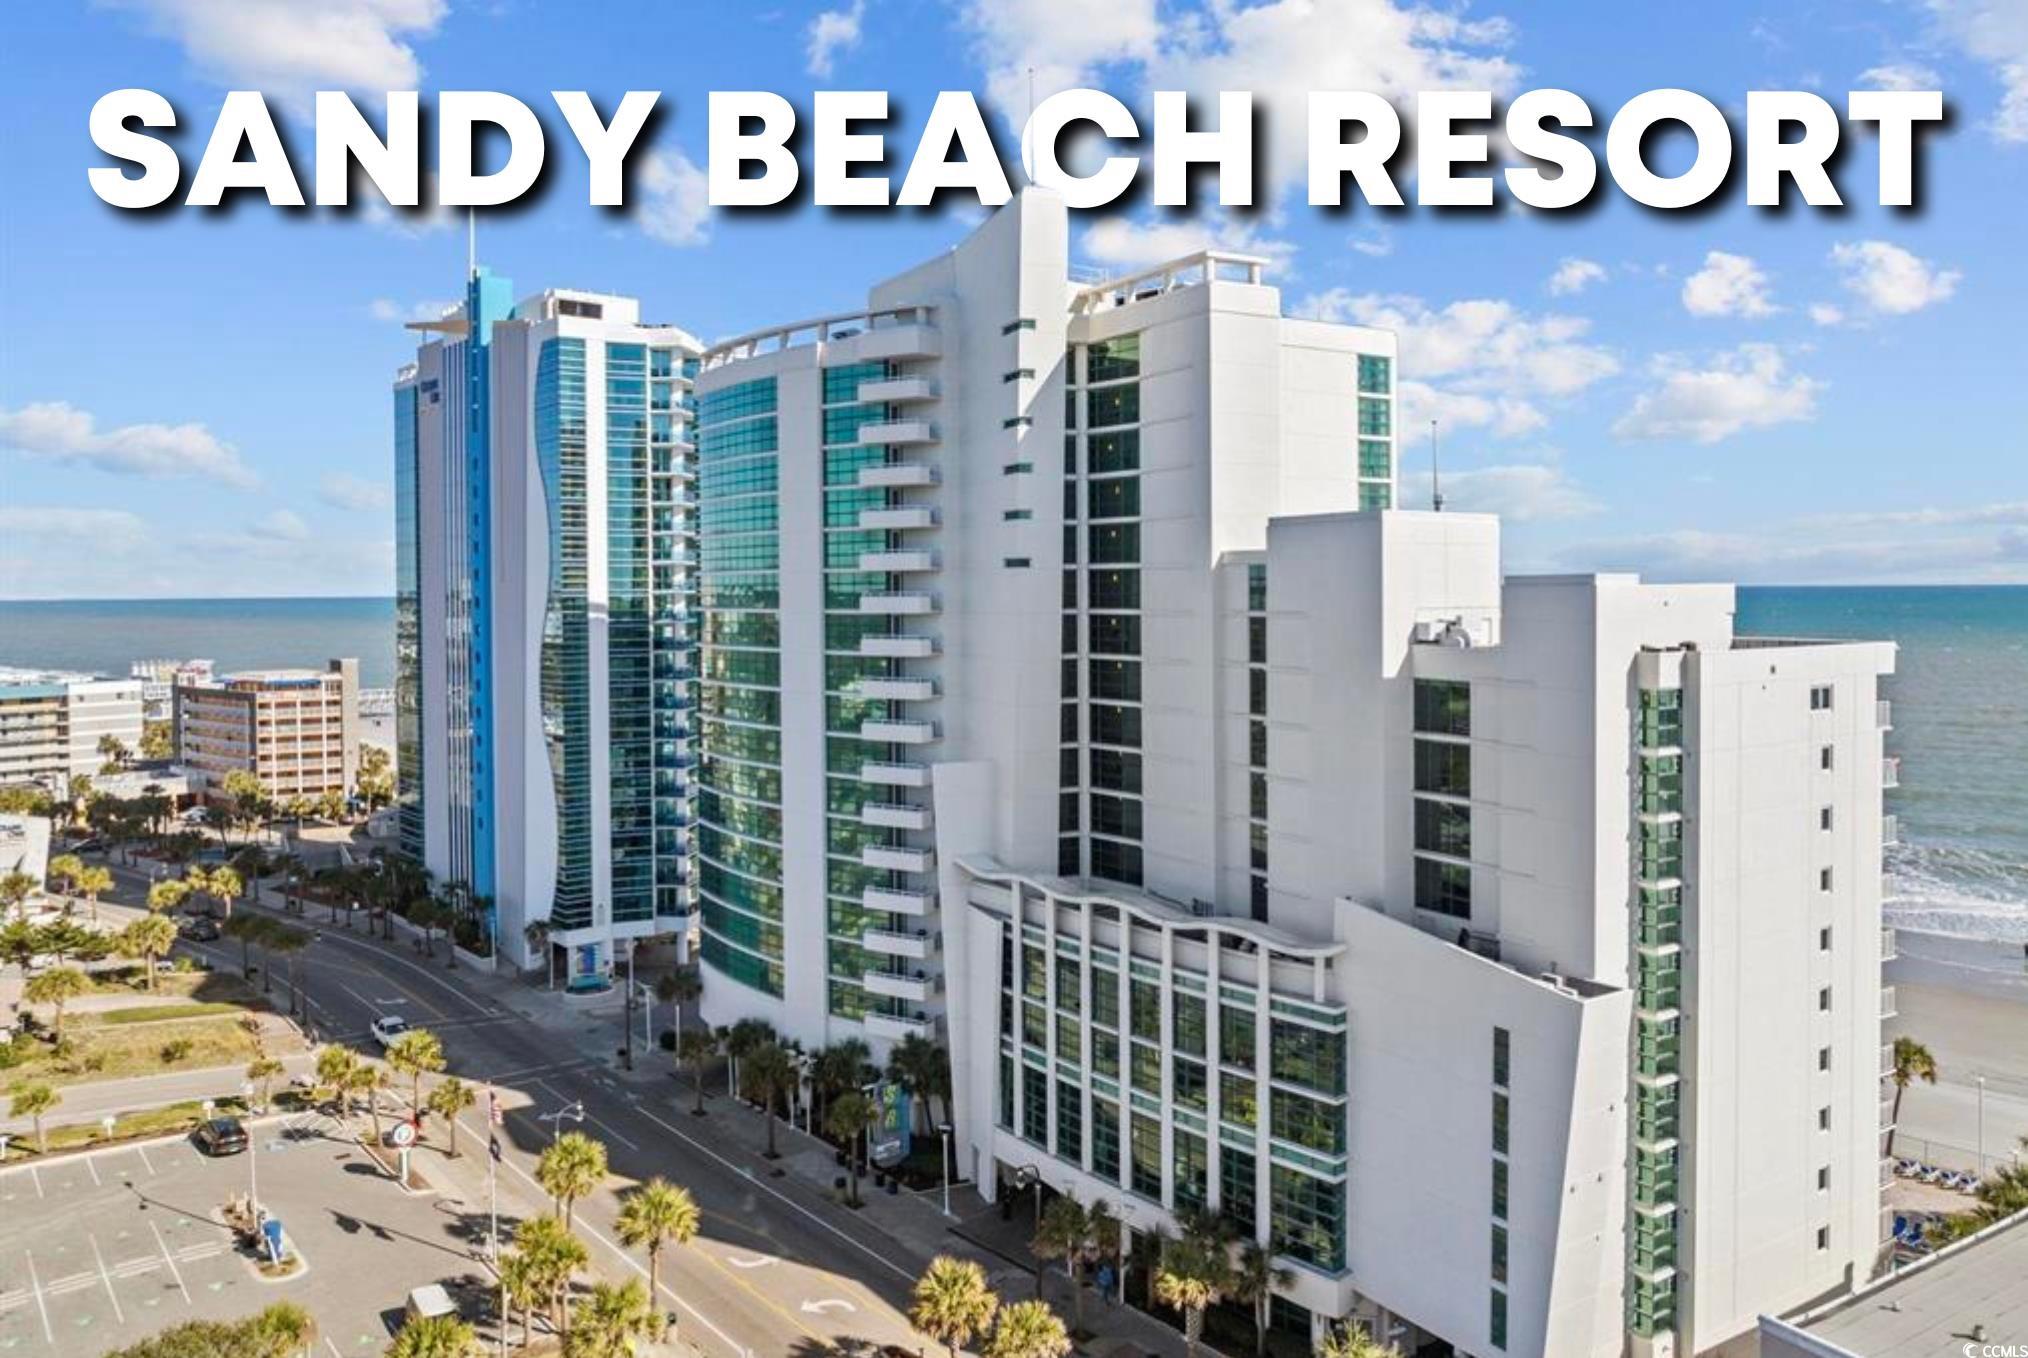 unlock an exceptional opportunity to maximize your returns with this prime oceanfront 3 bedroom, 2 bathroom condo in sandy beach resort. with its unbeatable location, spacious layout, higher floor views, and upscale finishes, this condo checks all the boxes! from breathtaking direct oceanfront views to a strong rental potential, this condo offers a seamless blend of luxury and financial gain. take advantage of the vacation rental market and secure your stake in the sought-after myrtle beach market! with three generous bedrooms, each furnished with king-size beds, this condo effortlessly accommodates up to eight guests. the bathrooms and kitchen boast elegant tile floors and sleek granite countertops, elevating the overall aesthetic and adding a touch of sophistication. the master bedroom is a tranquil retreat that offers direct access to the balcony, allowing you to wake up to invigorating ocean breezes and stunning sunrises. sandy beach oceanfront resort, located in the heart of myrtle beach, offers a range of amenities for both relaxation and fun for you or your guests. enjoy an oceanfront pool, a children's interactive pool area, and a serene lazy river. the resort also features a fully-equipped fitness center and provides free high-speed internet. year-round swimming is made possible with multiple outdoor heated pools and hot tubs. sandy beach oceanfront resort combines fun, relaxation, and convenience, making it a perfect choice for a myrtle beach getaway. don't miss out on this golden opportunity to make your portfolio shine!